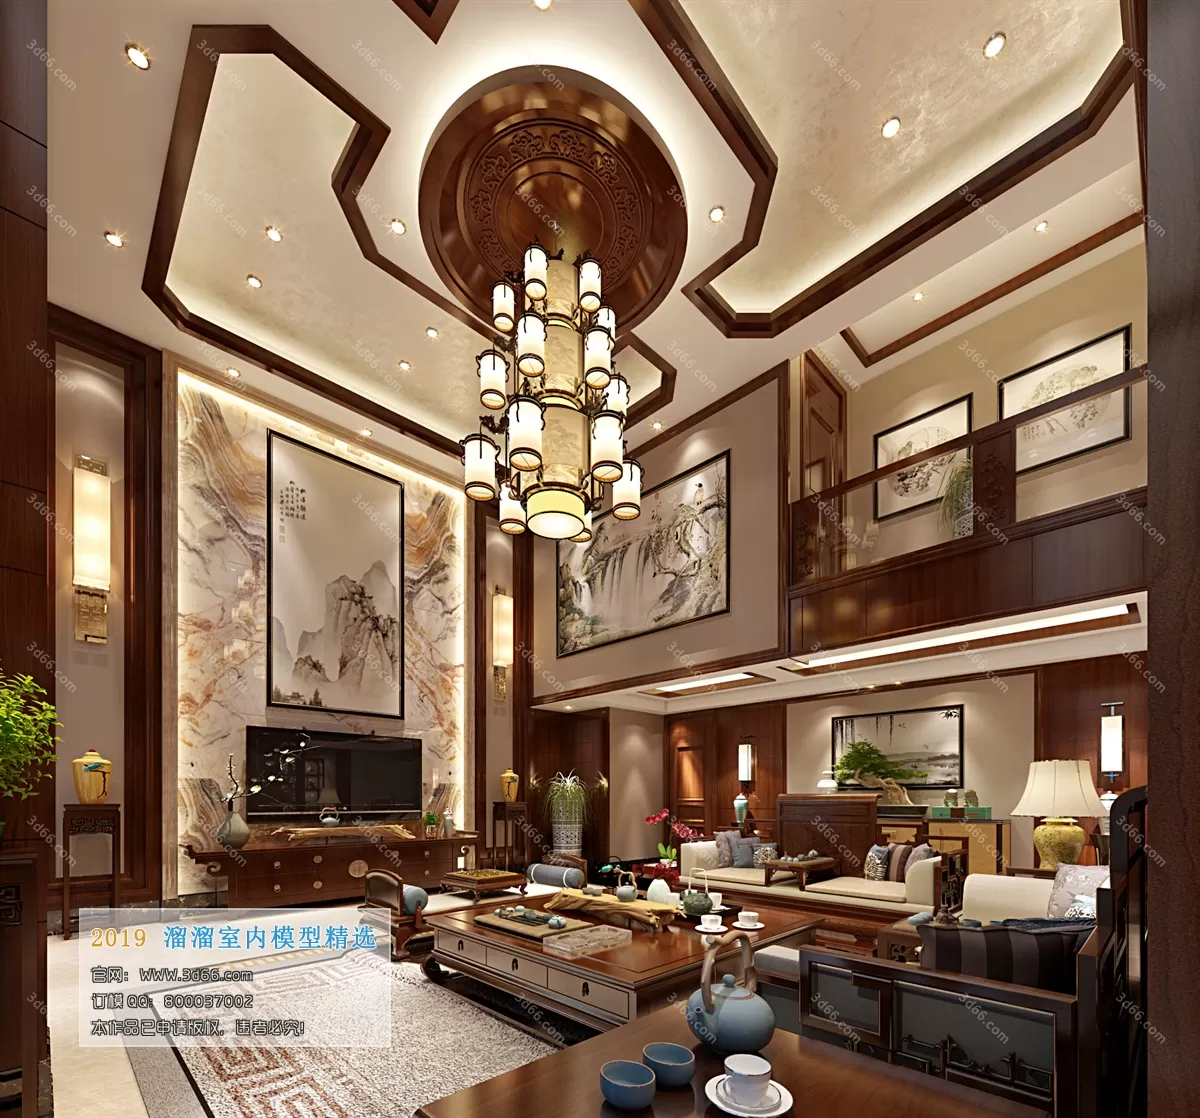 LIVING ROOM 3D MODELS – C073-Chinese style – 268